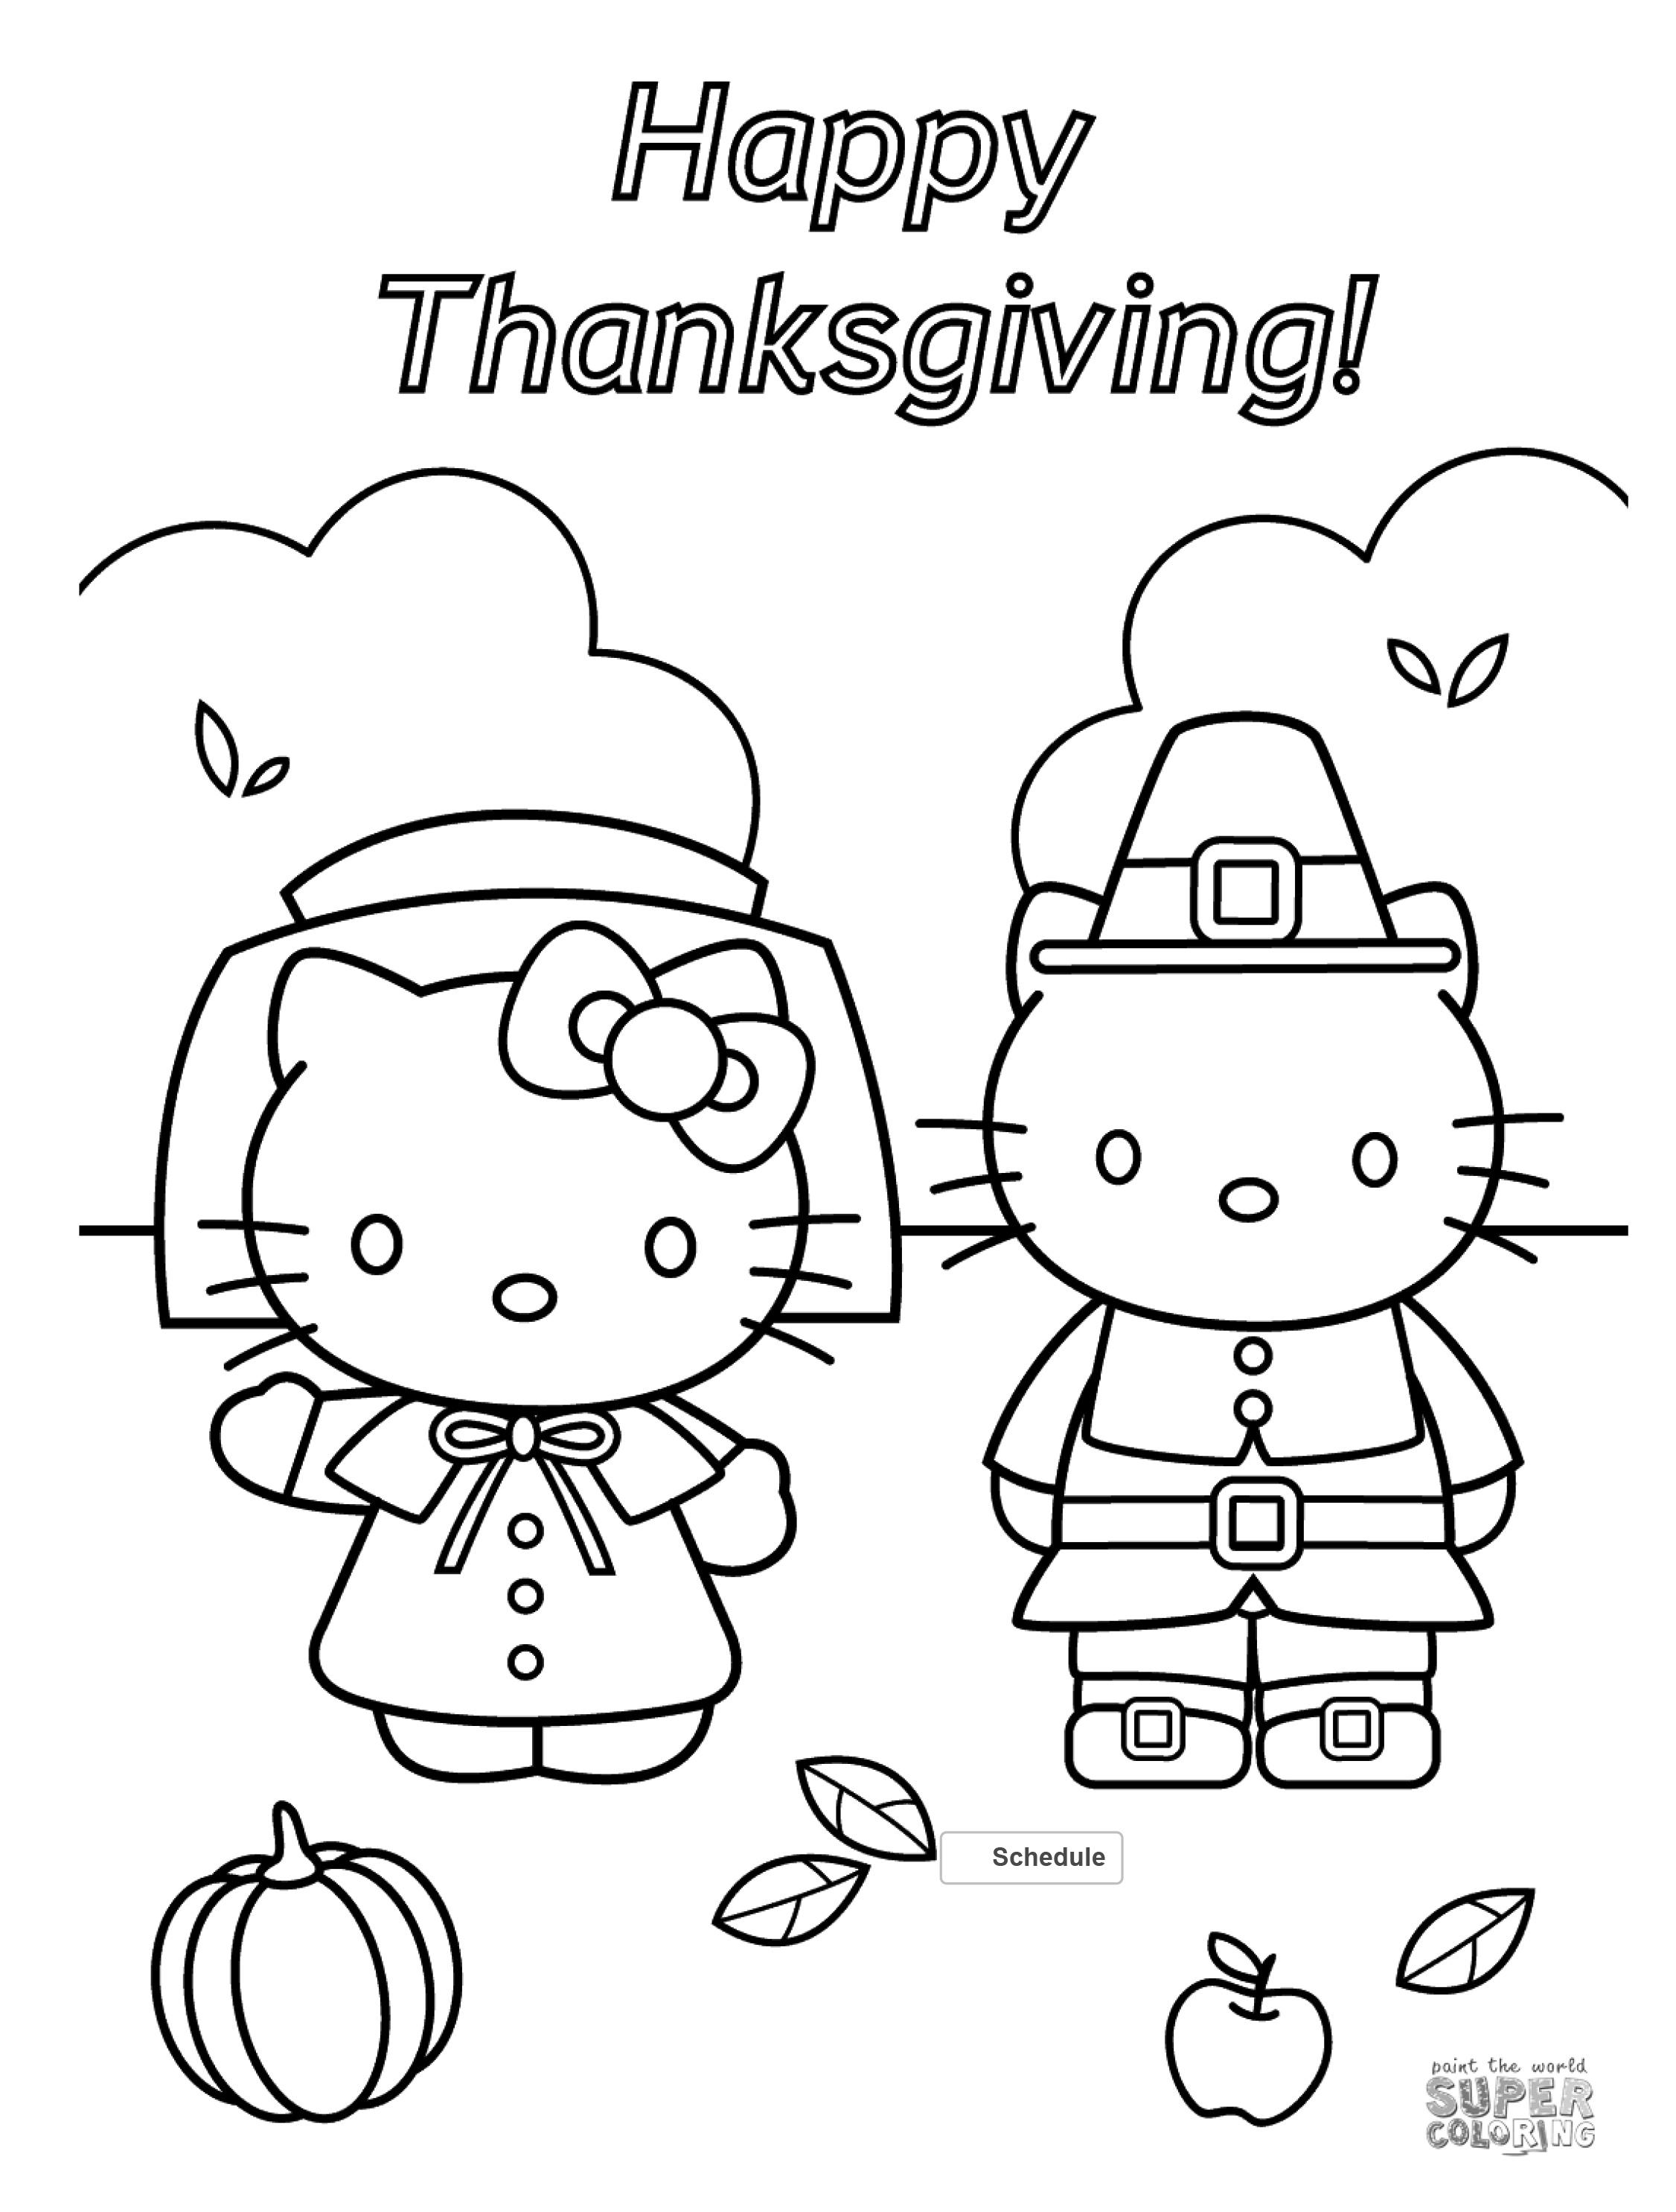 FREE Thanksgiving Coloring Pages For Adults & Kids   Happiness Is ...